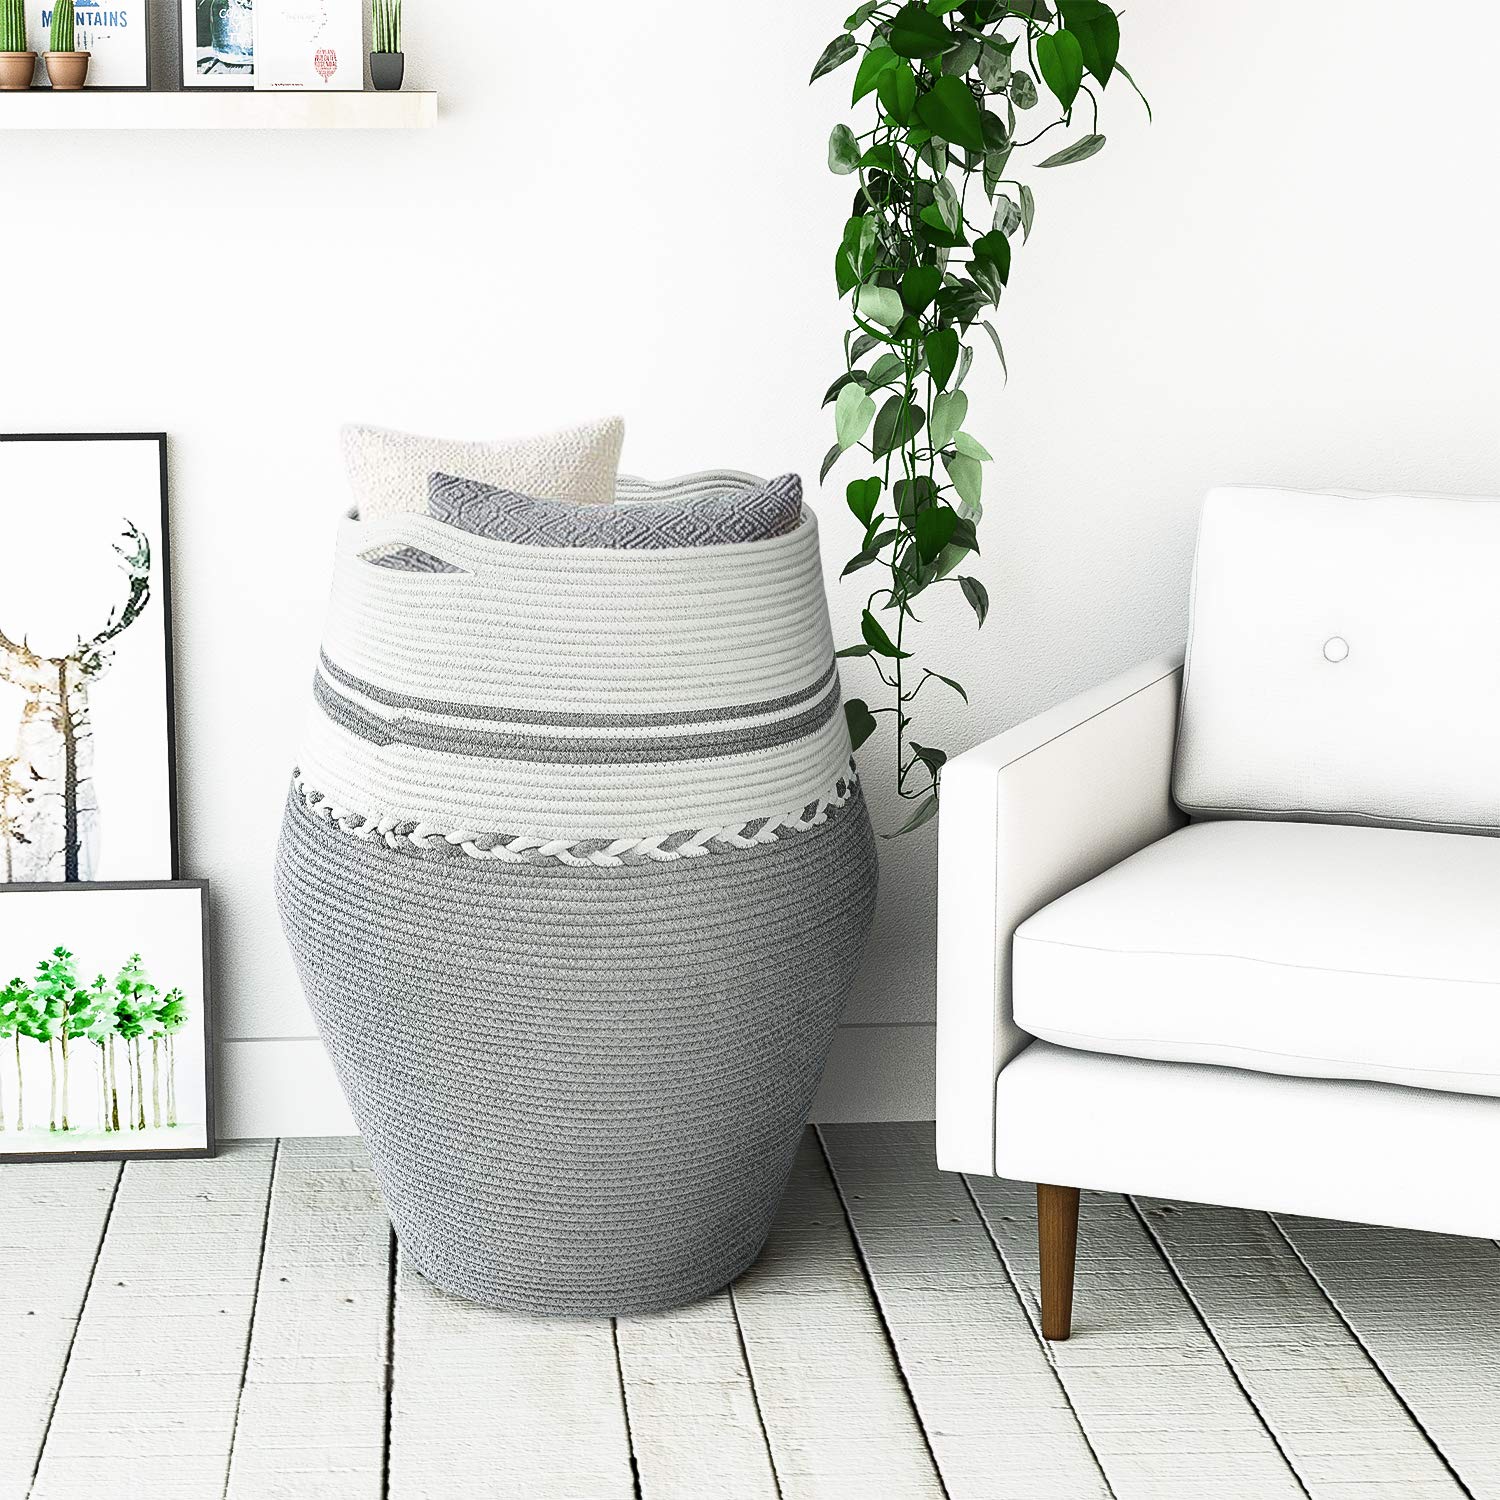 tall gray and white knitted basket with lined art